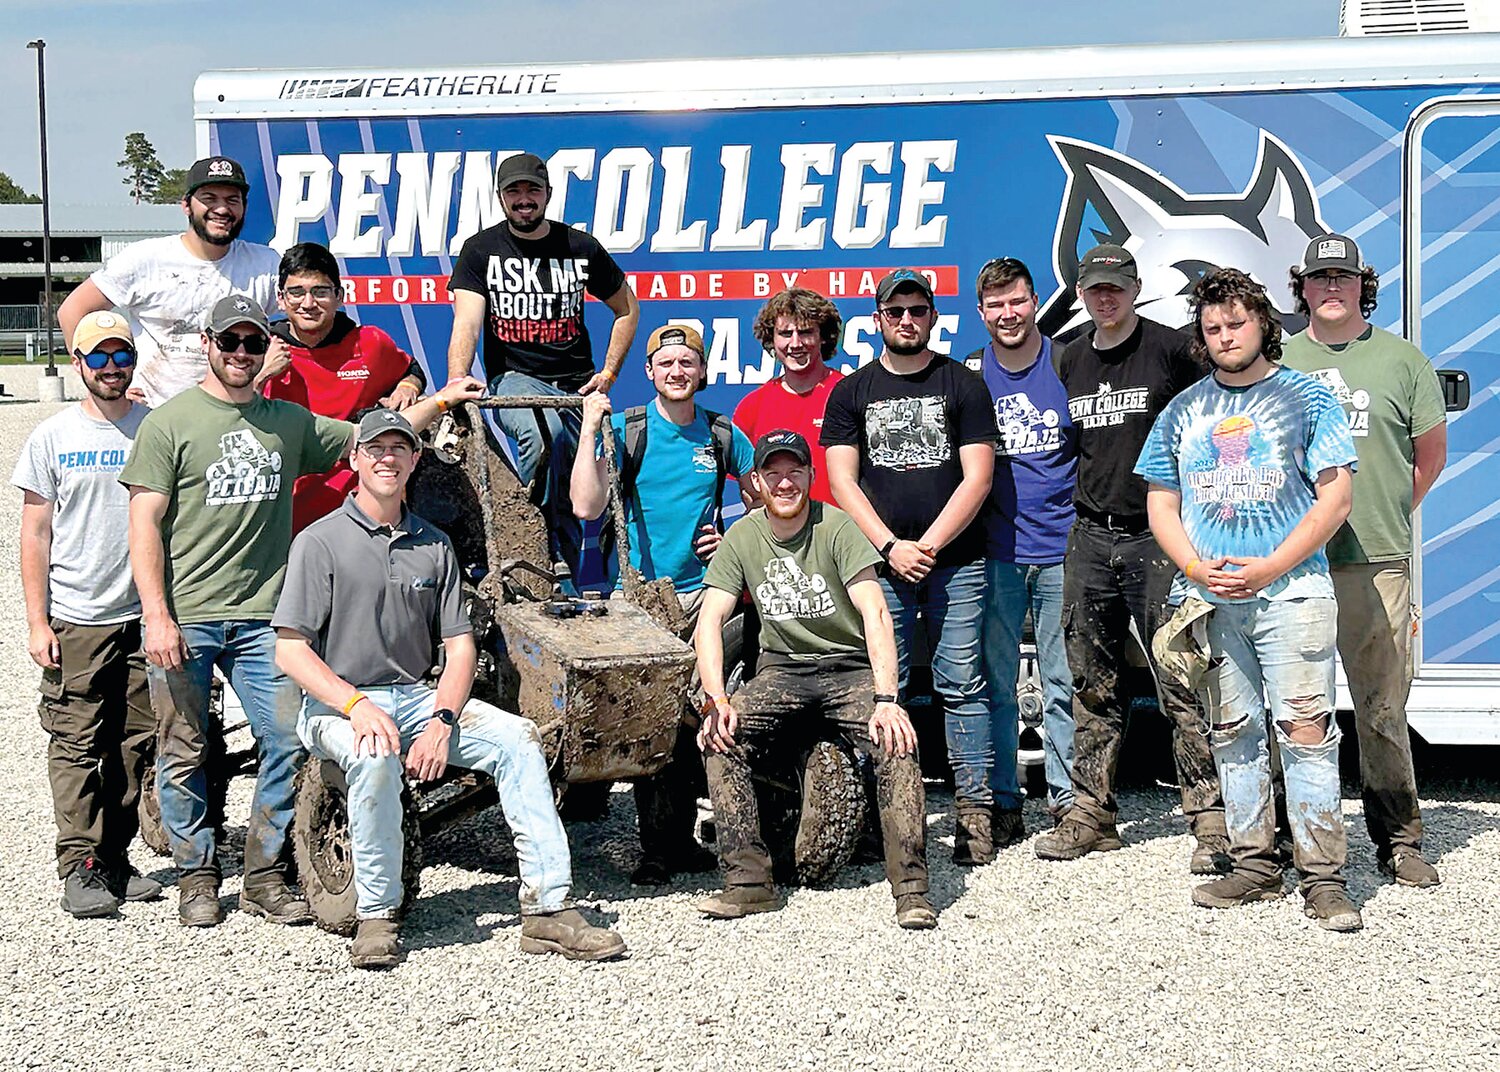 The Pennsylvania College of Technology team had a strong showing at Baja SAE Oshkosh in Wisconson, finishing 10th out of 57 cars in the endurance race.